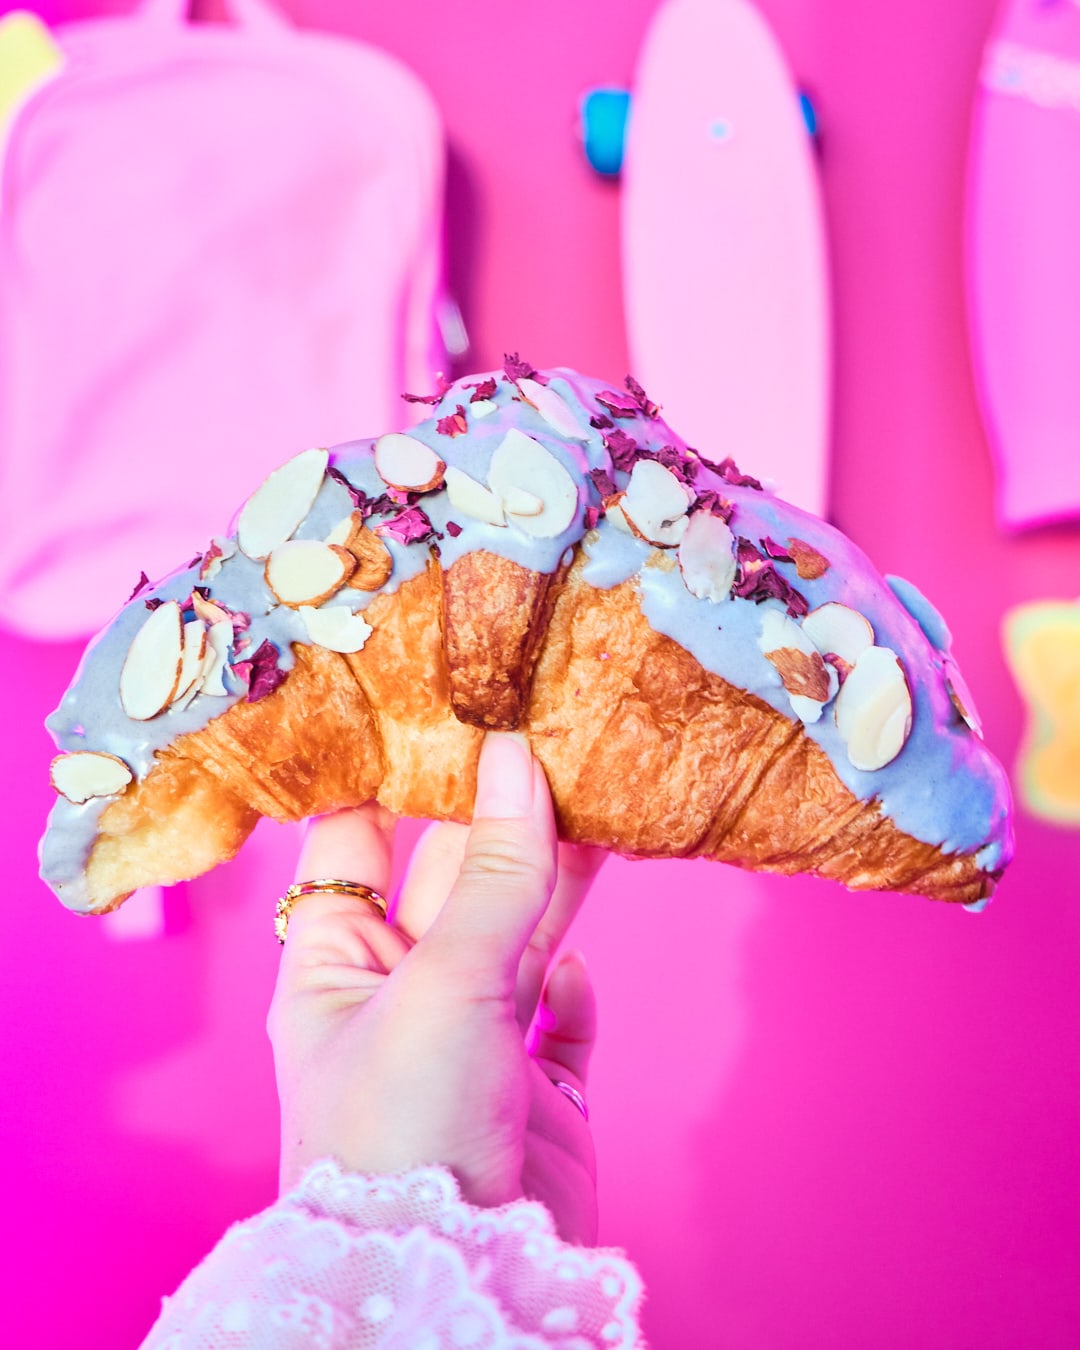 Croissant half dipped in purple ube chocolate sprinkled with almonds and rose petals being held in hand.